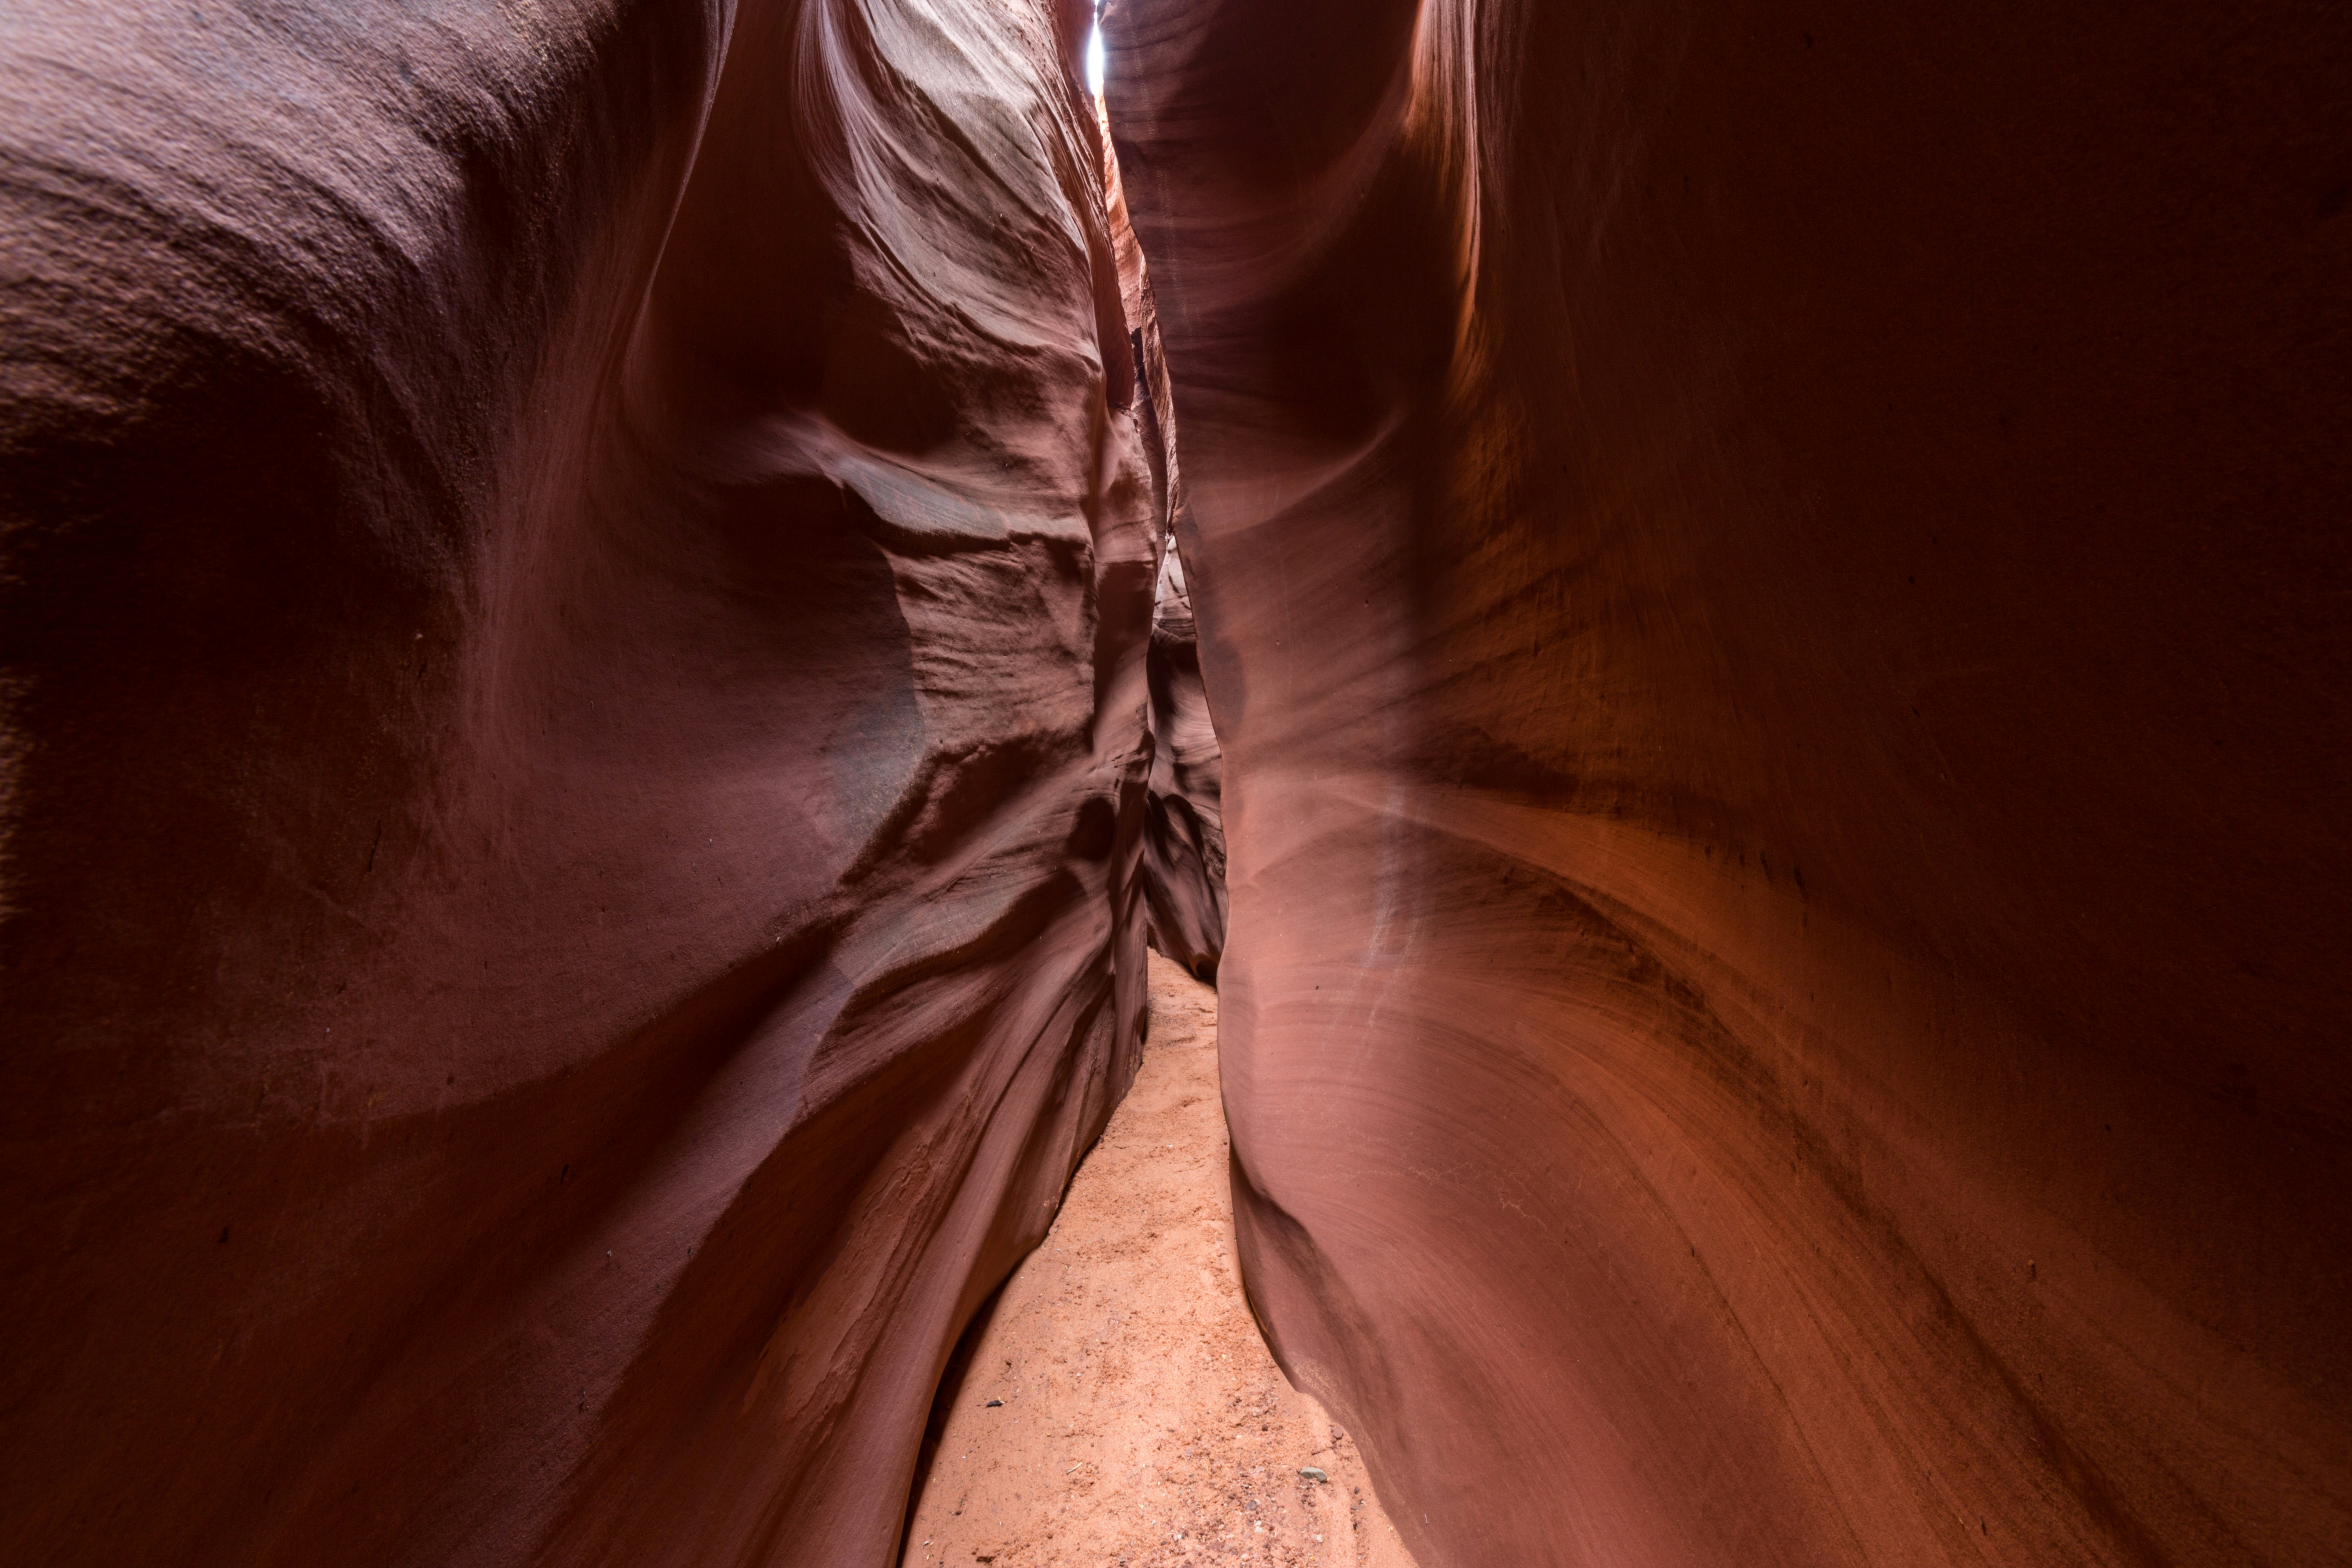 This is a Slot canyon i went in out in Escalate Utah a few years back. Quite a place to see